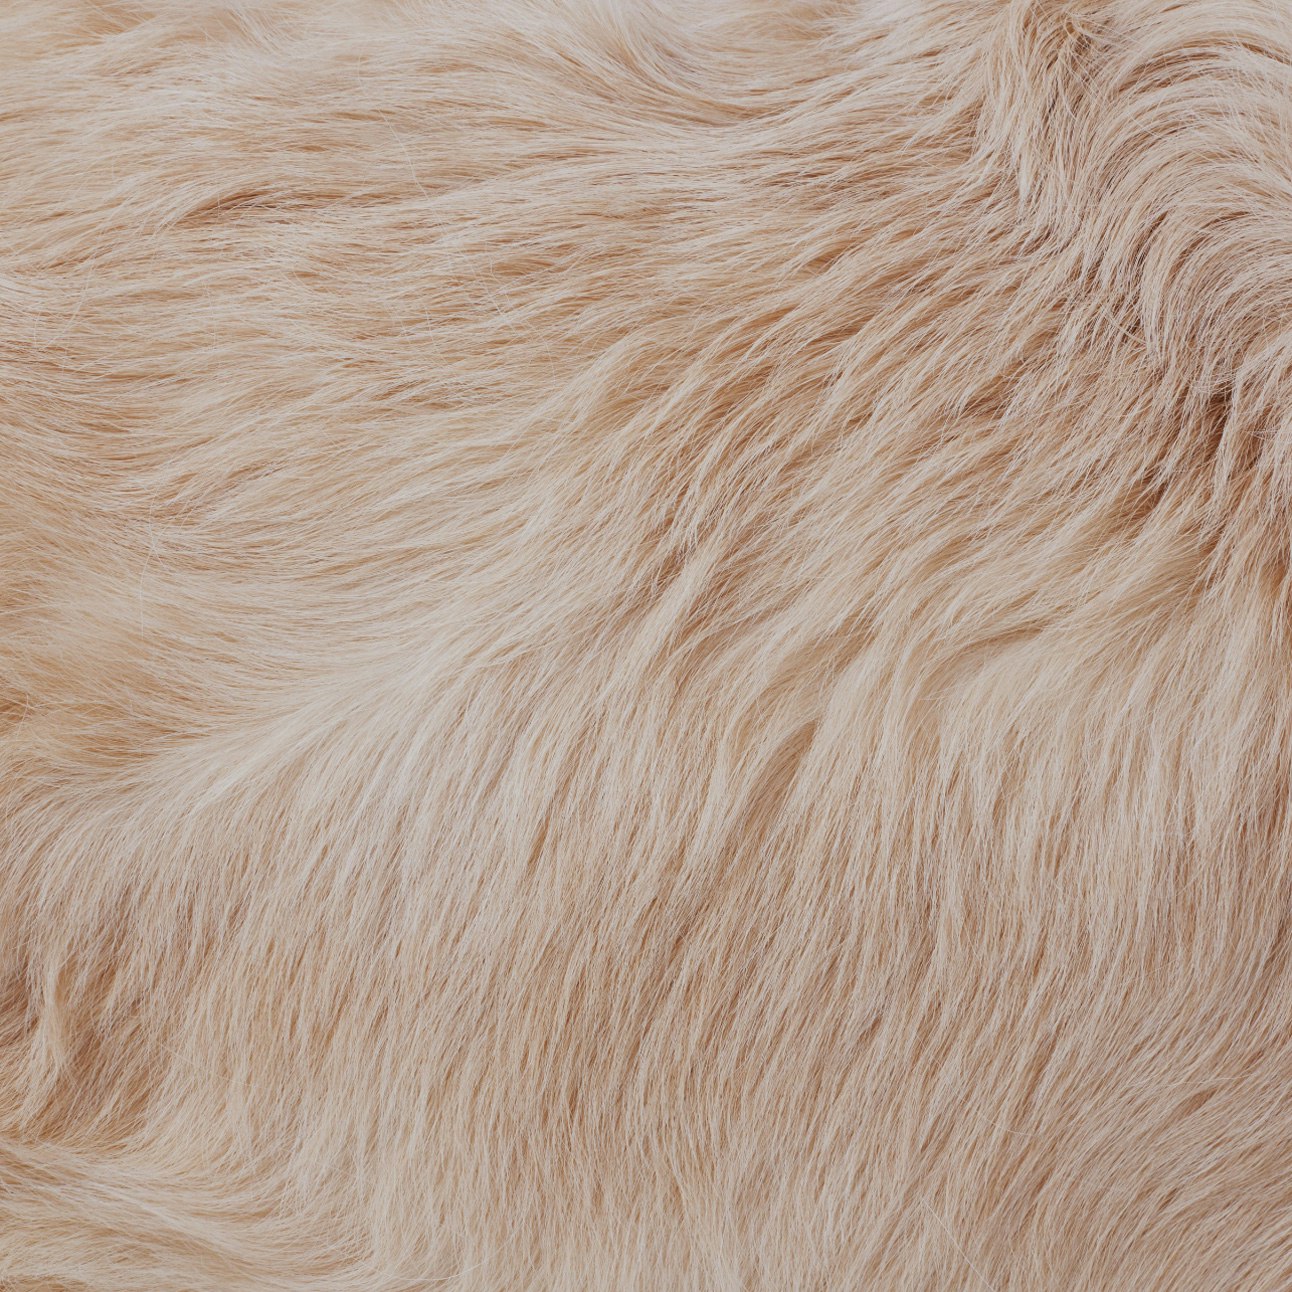 Close-up of fluffy dog fur texture